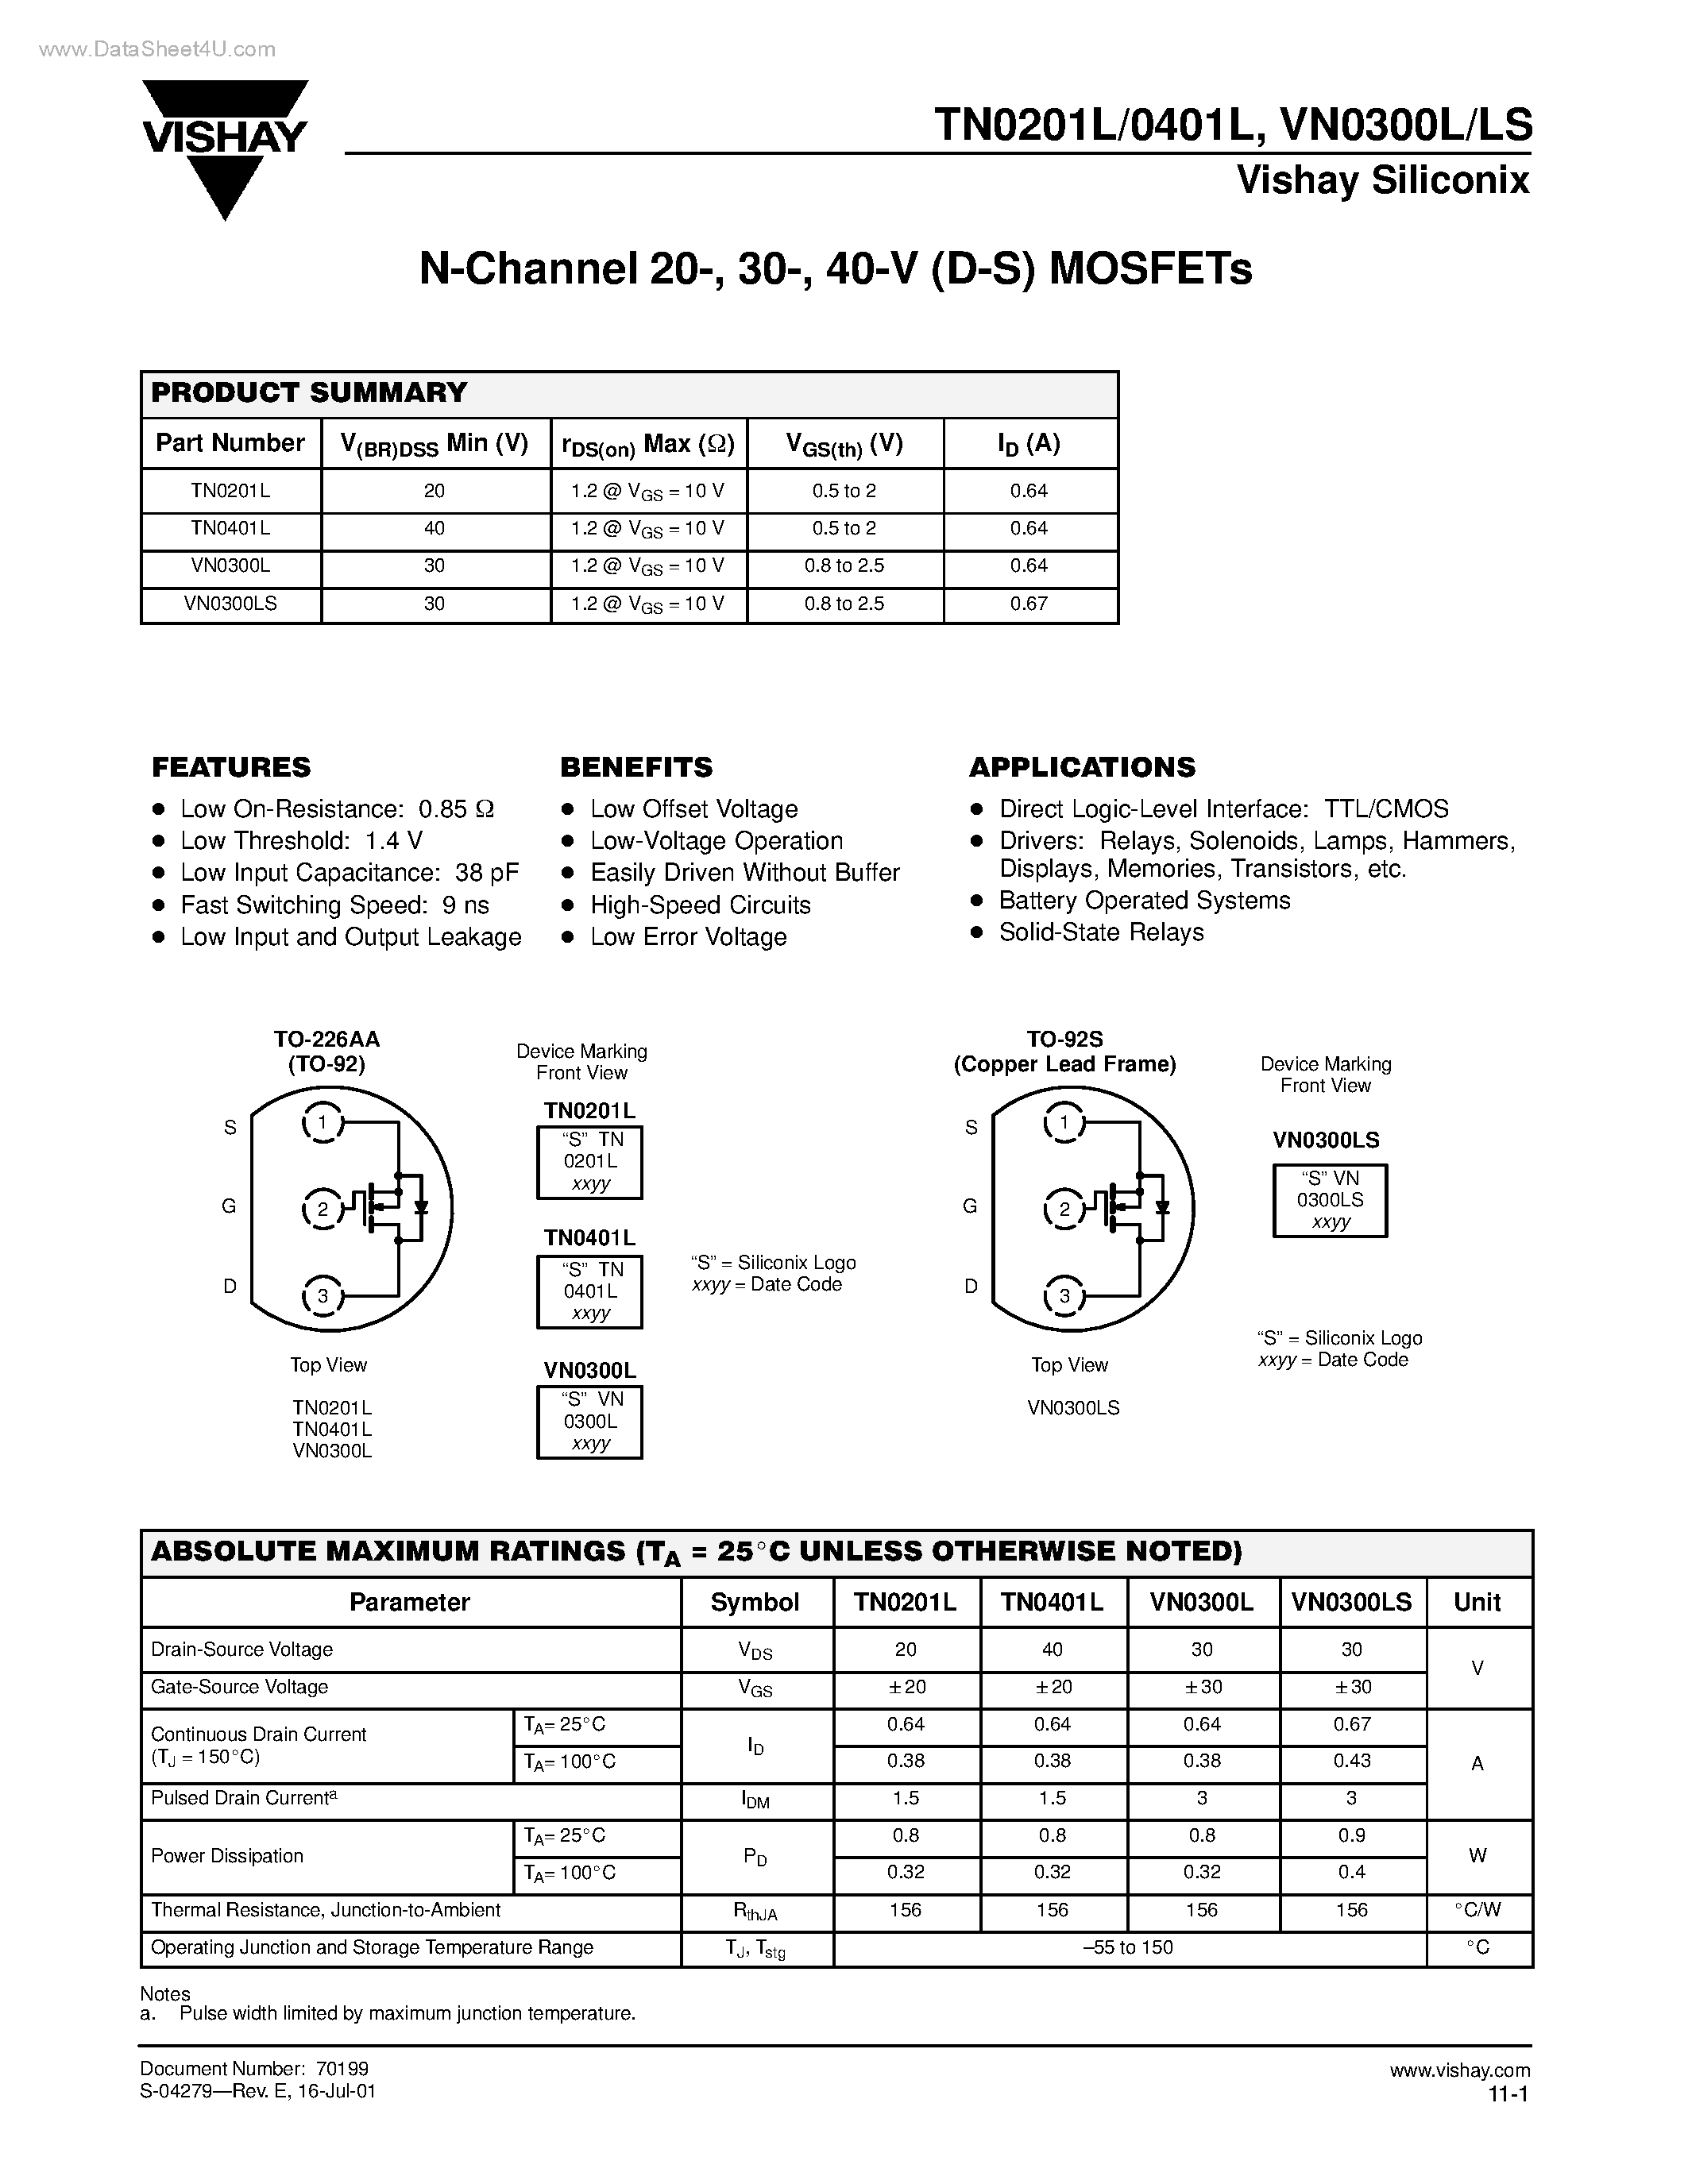 Datasheet VN0300L - N-Channel 20-/ 30-/ 40-V (D-S) MOSFETs page 1